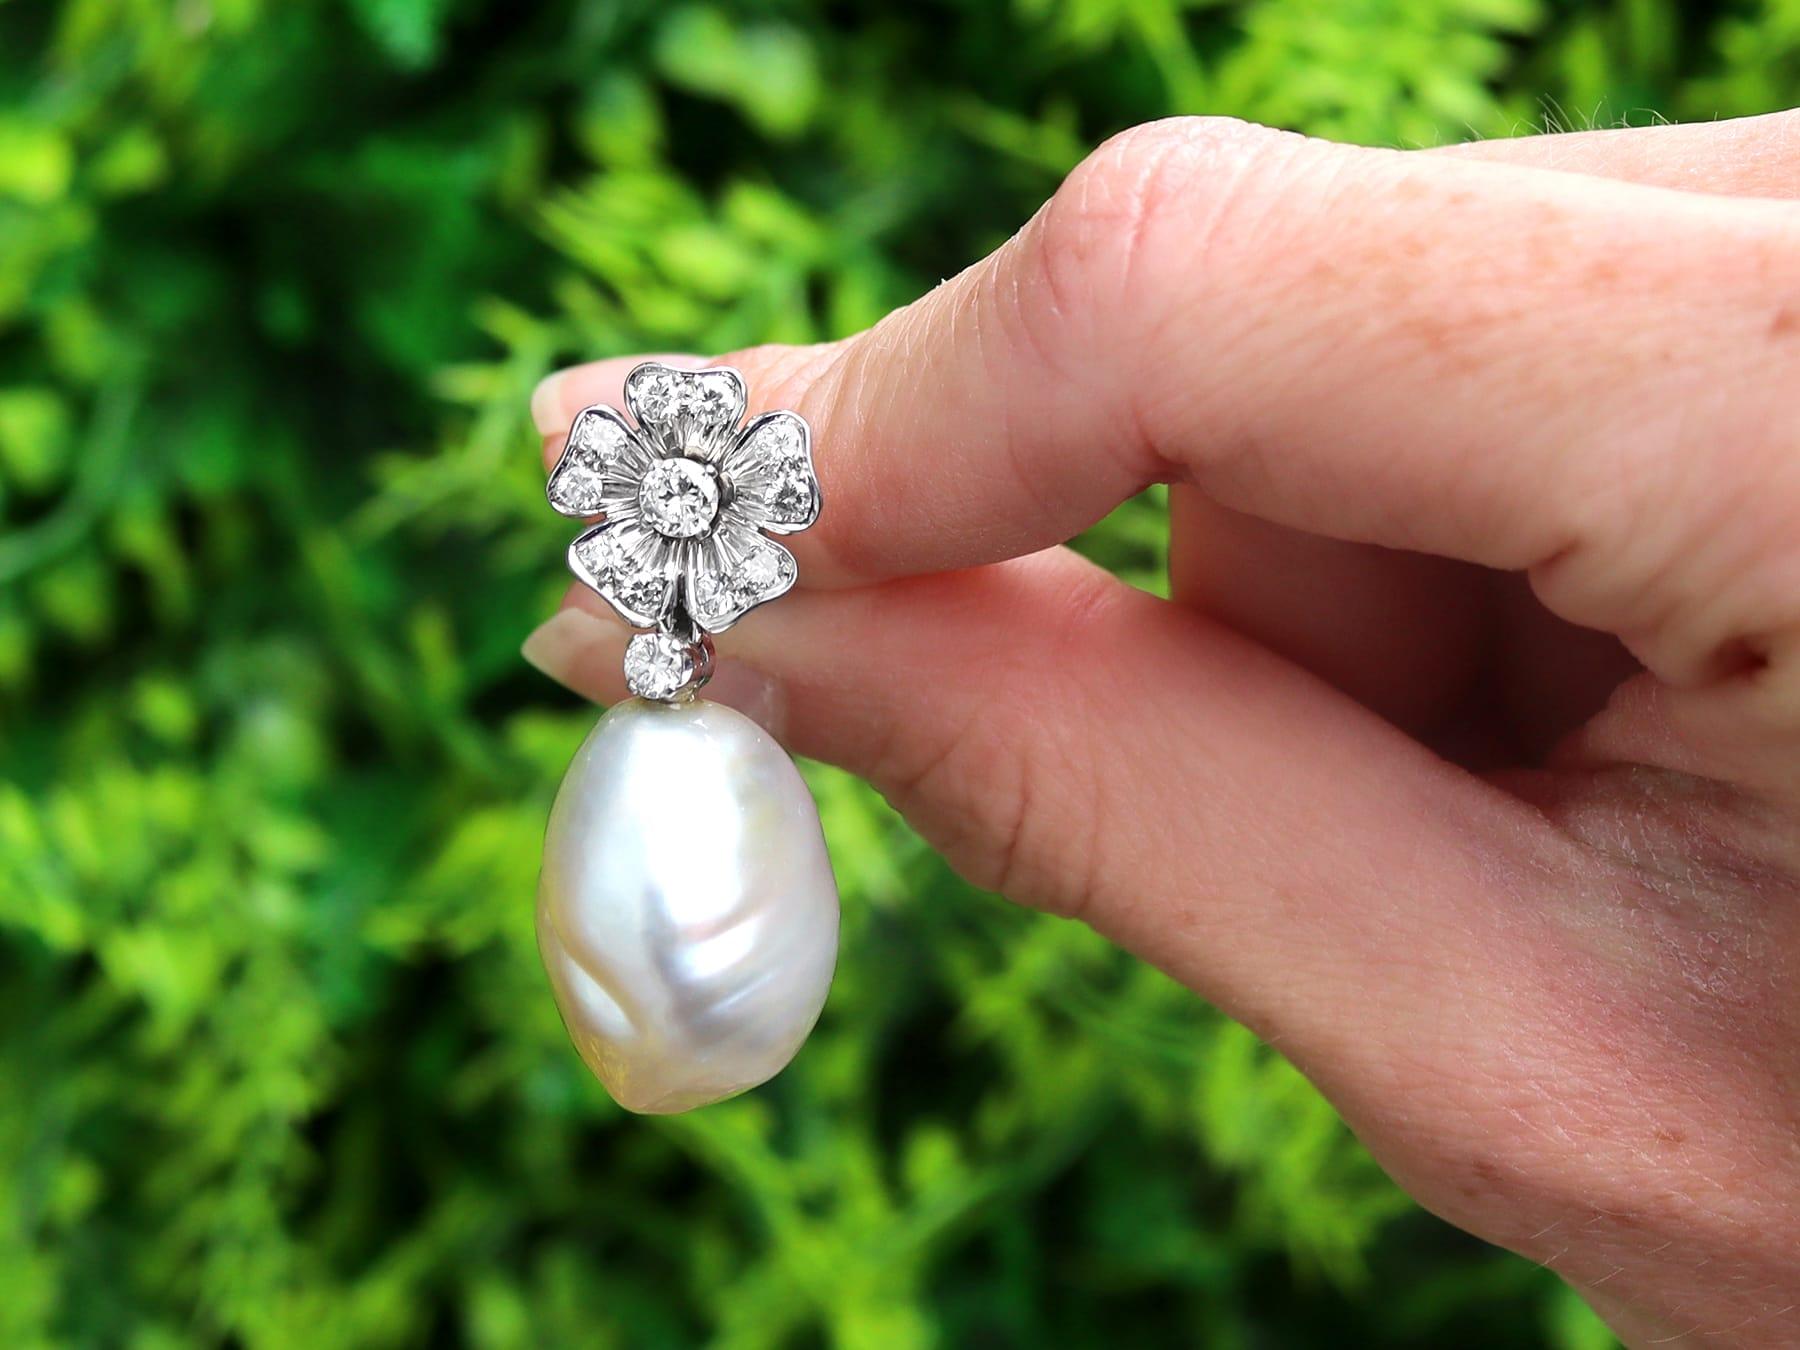 A stunning, fine and impressive pair of vintage 1.90 carat diamond and blister pearl, platinum and 18 karat white gold drop earrings; part of our diverse vintage jewellery and estate jewelry collections

These stunning and large pearl and diamond